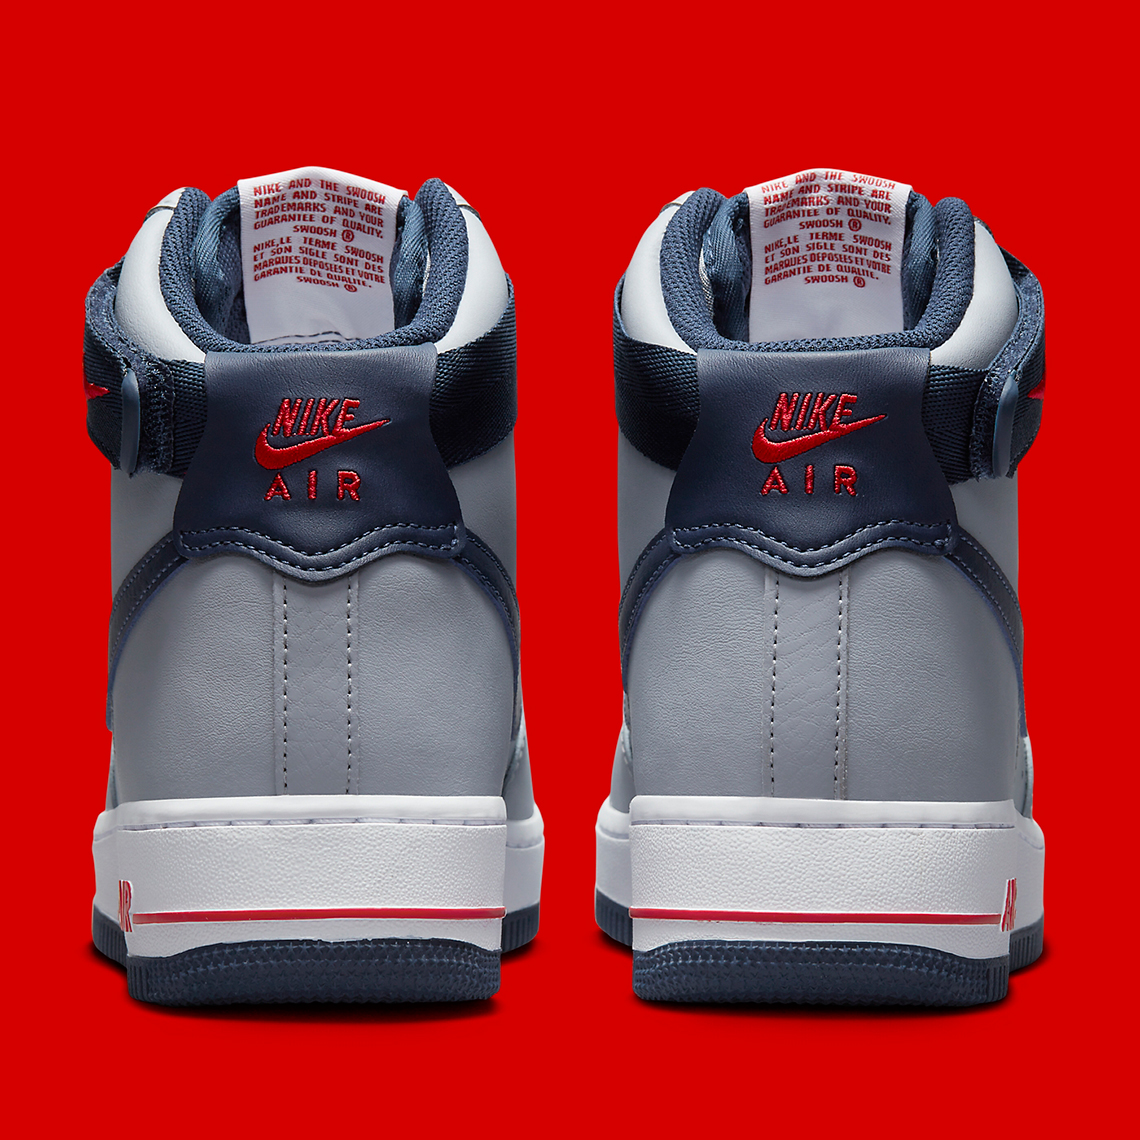 nike sb check for sale on ebay shoes High Grey Navy Red Dz7338 001 2